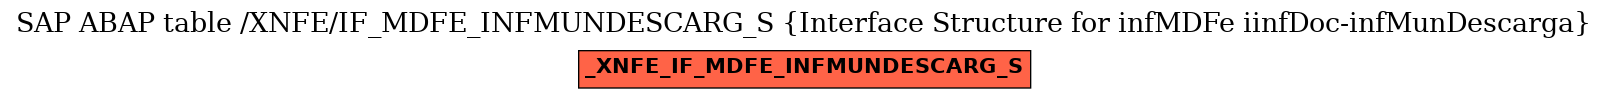 E-R Diagram for table /XNFE/IF_MDFE_INFMUNDESCARG_S (Interface Structure for infMDFe iinfDoc-infMunDescarga)